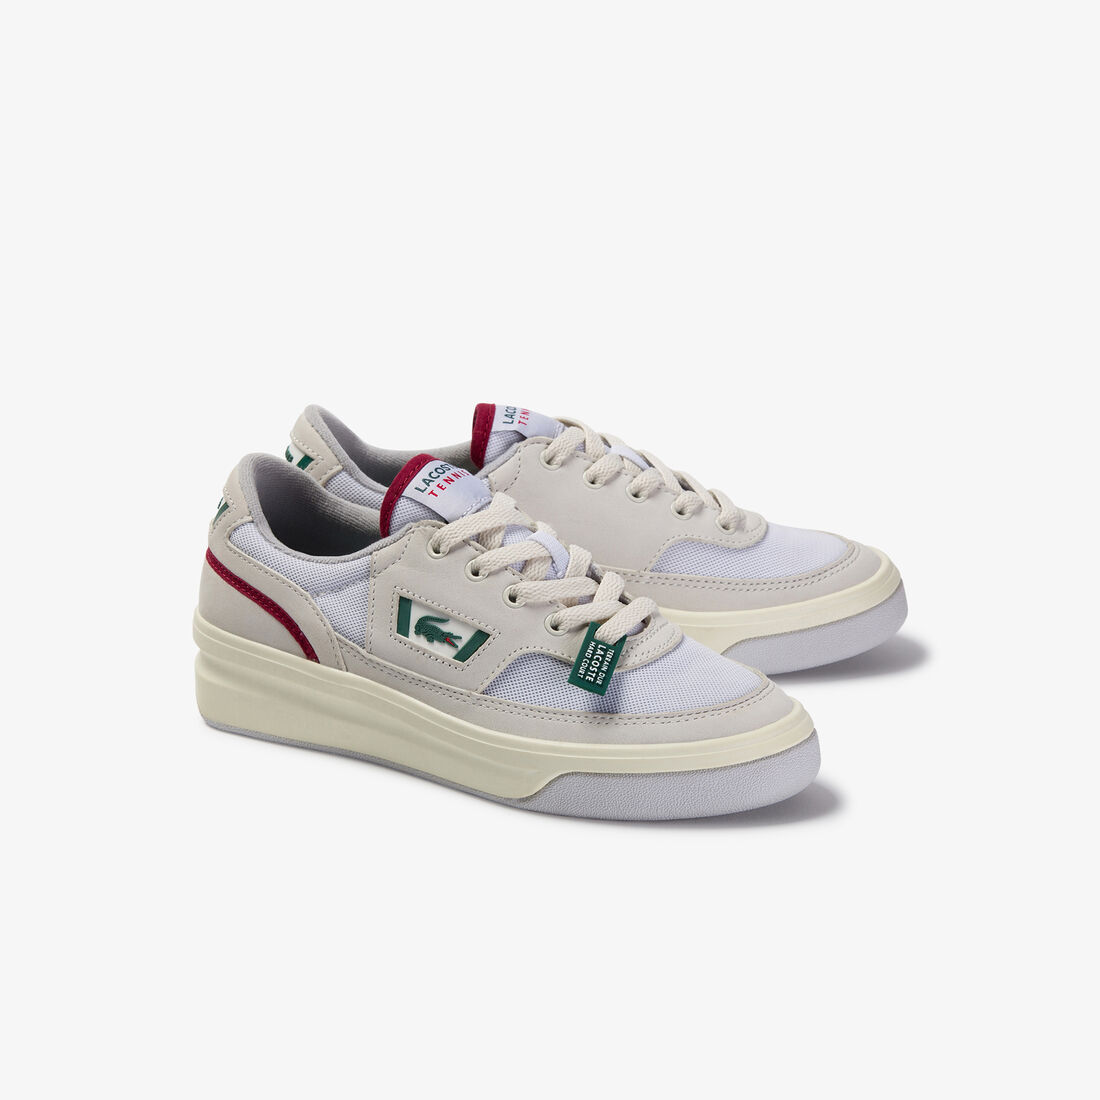 Women's G80 OG Leather and Textile Trainers